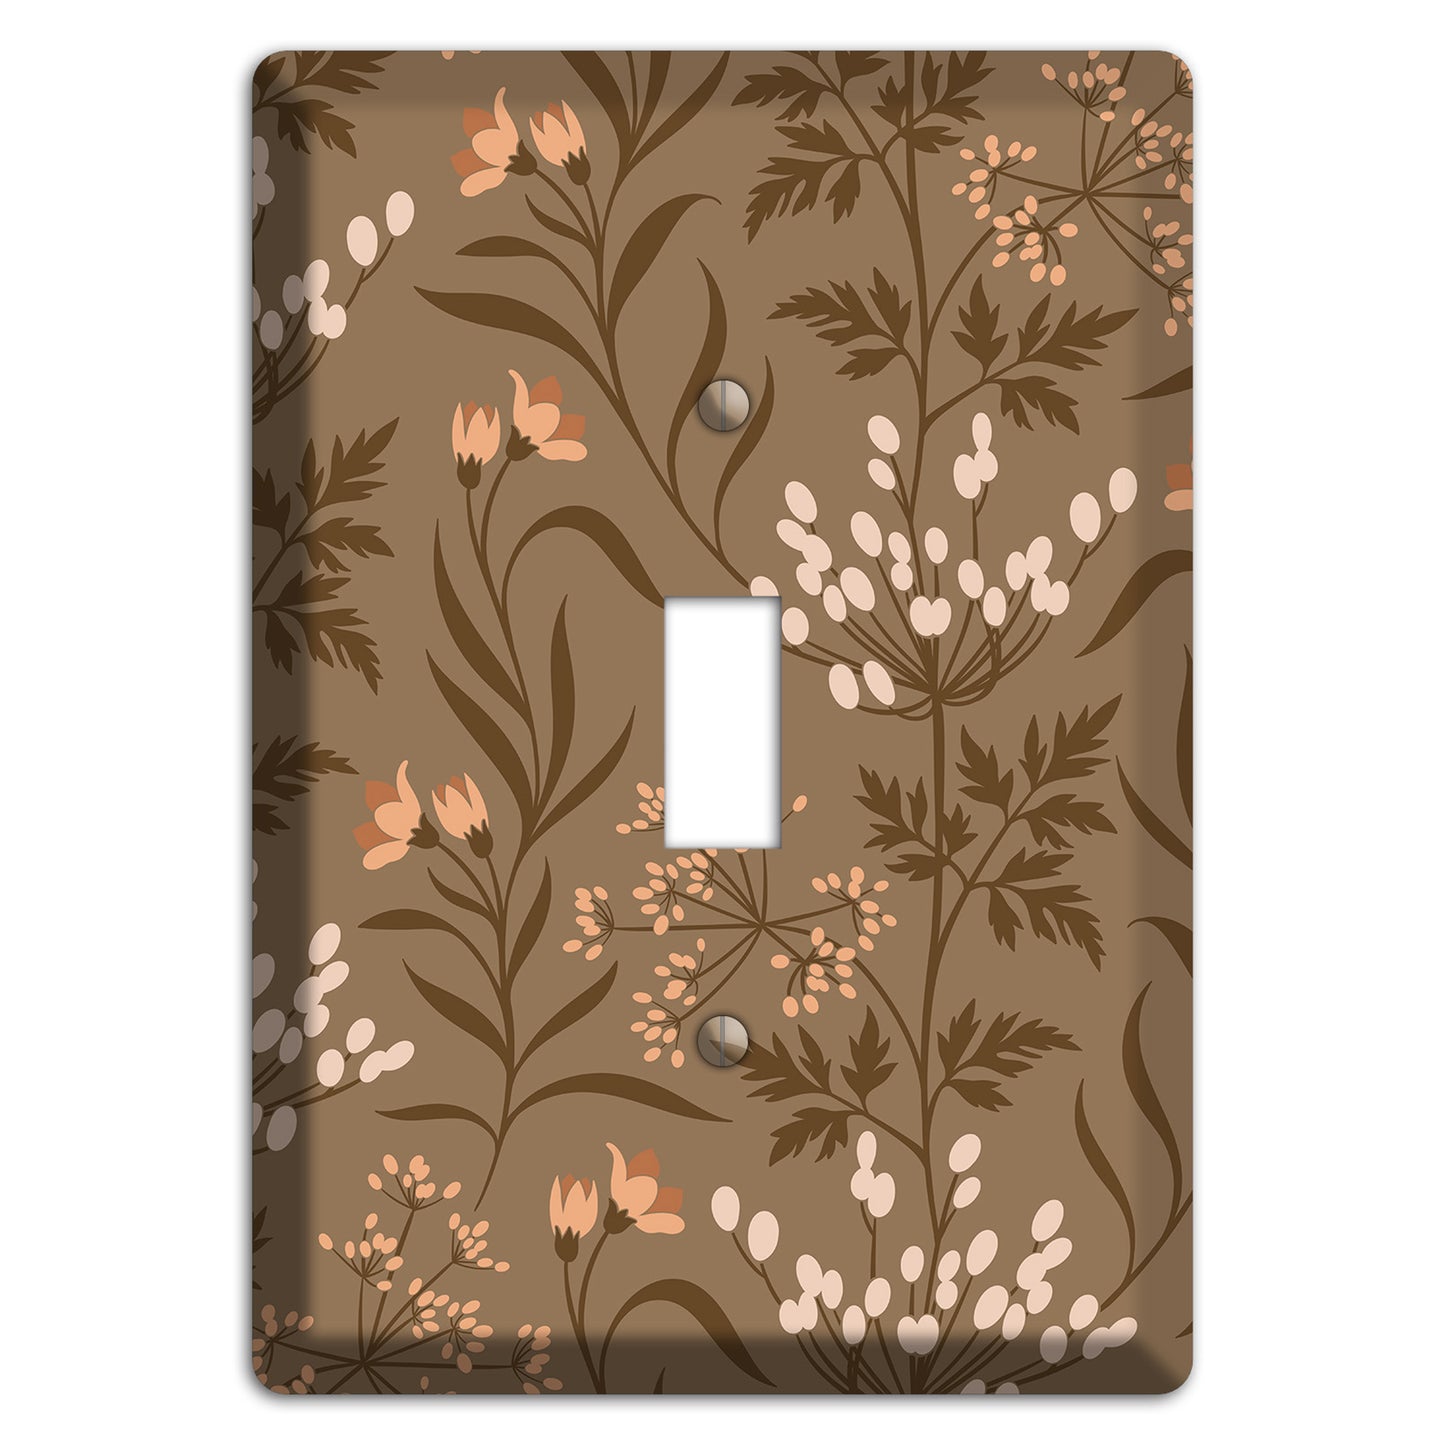 Fall Floral 2 Cover Plates